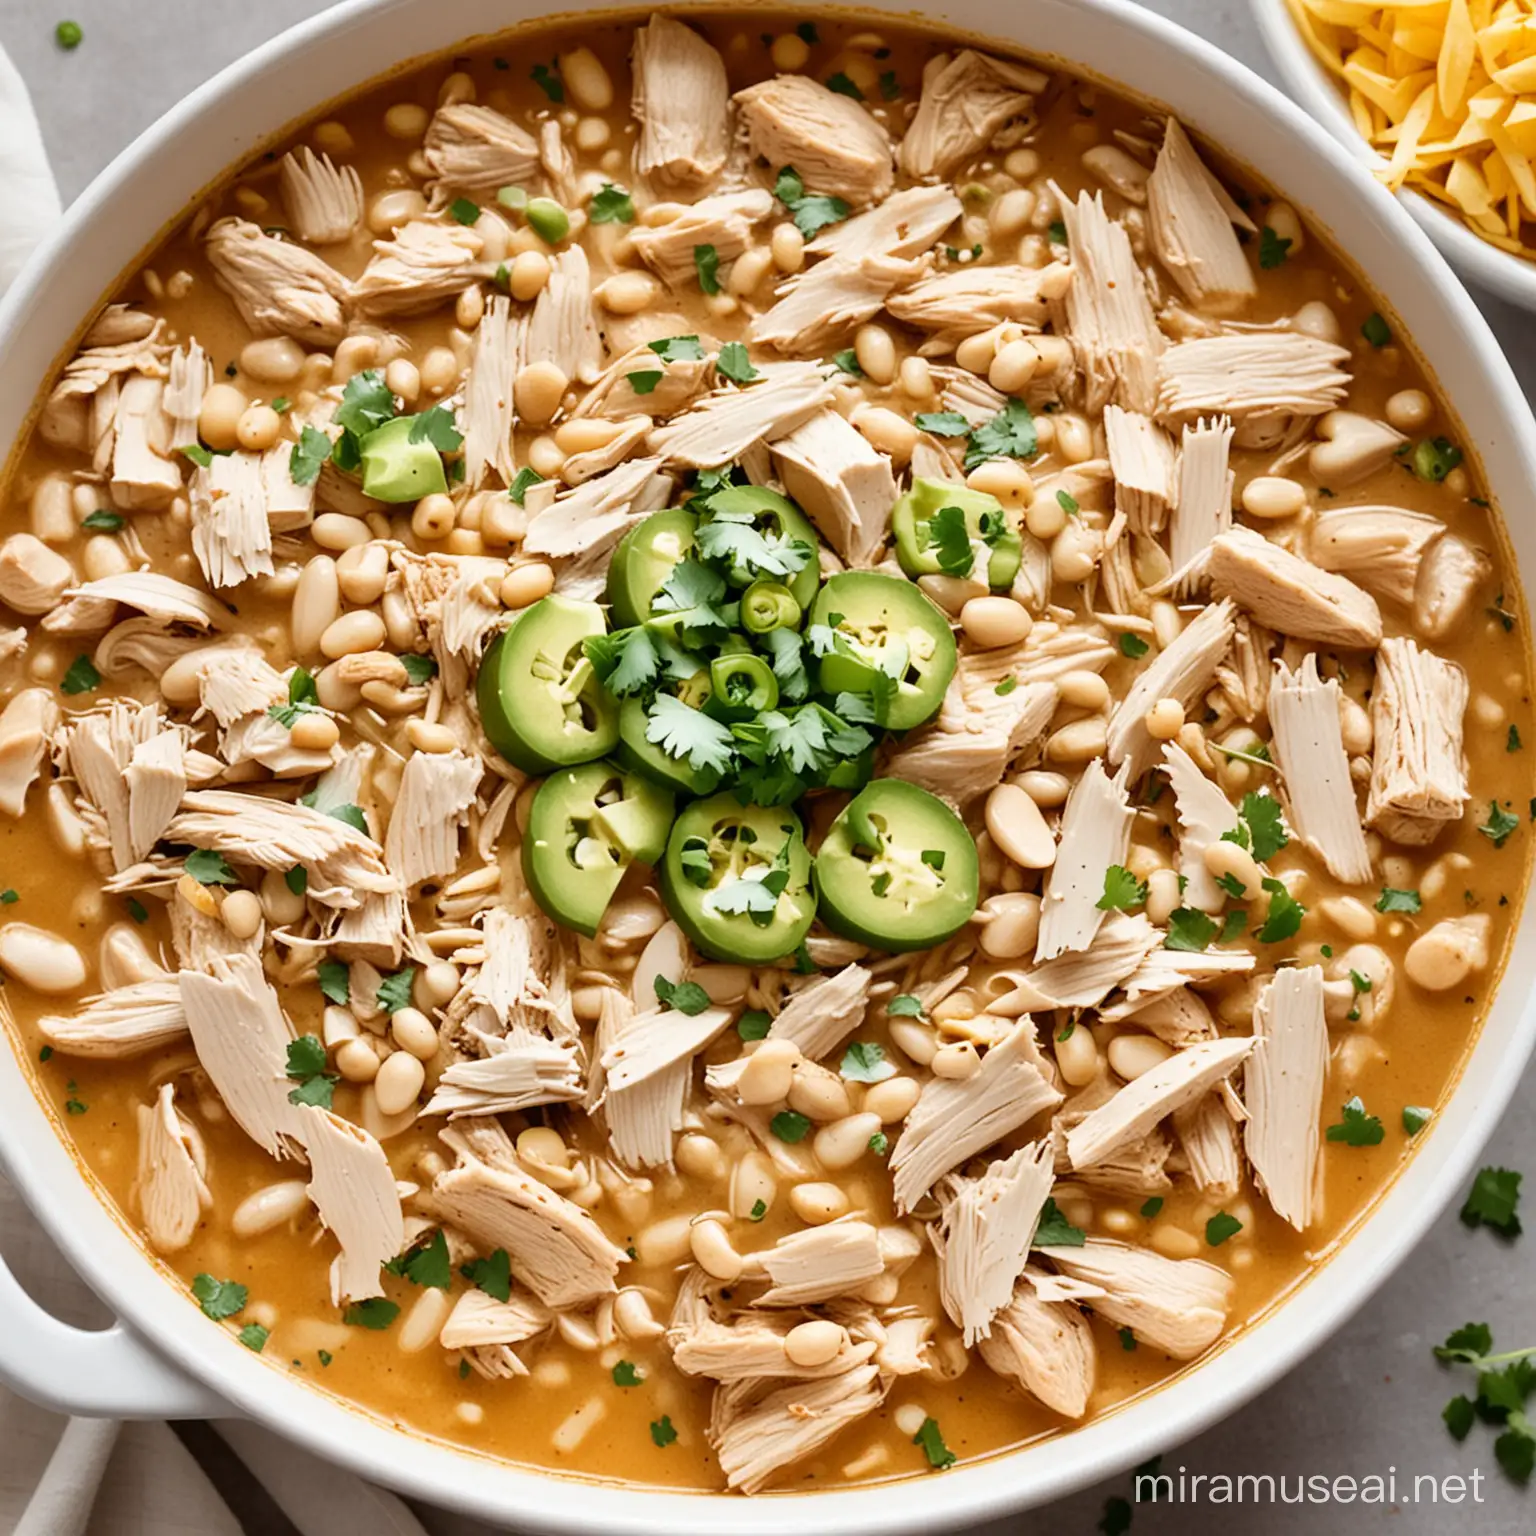 Delicious White Chicken Chili Recipe with Creamy Texture and Flavorful Ingredients